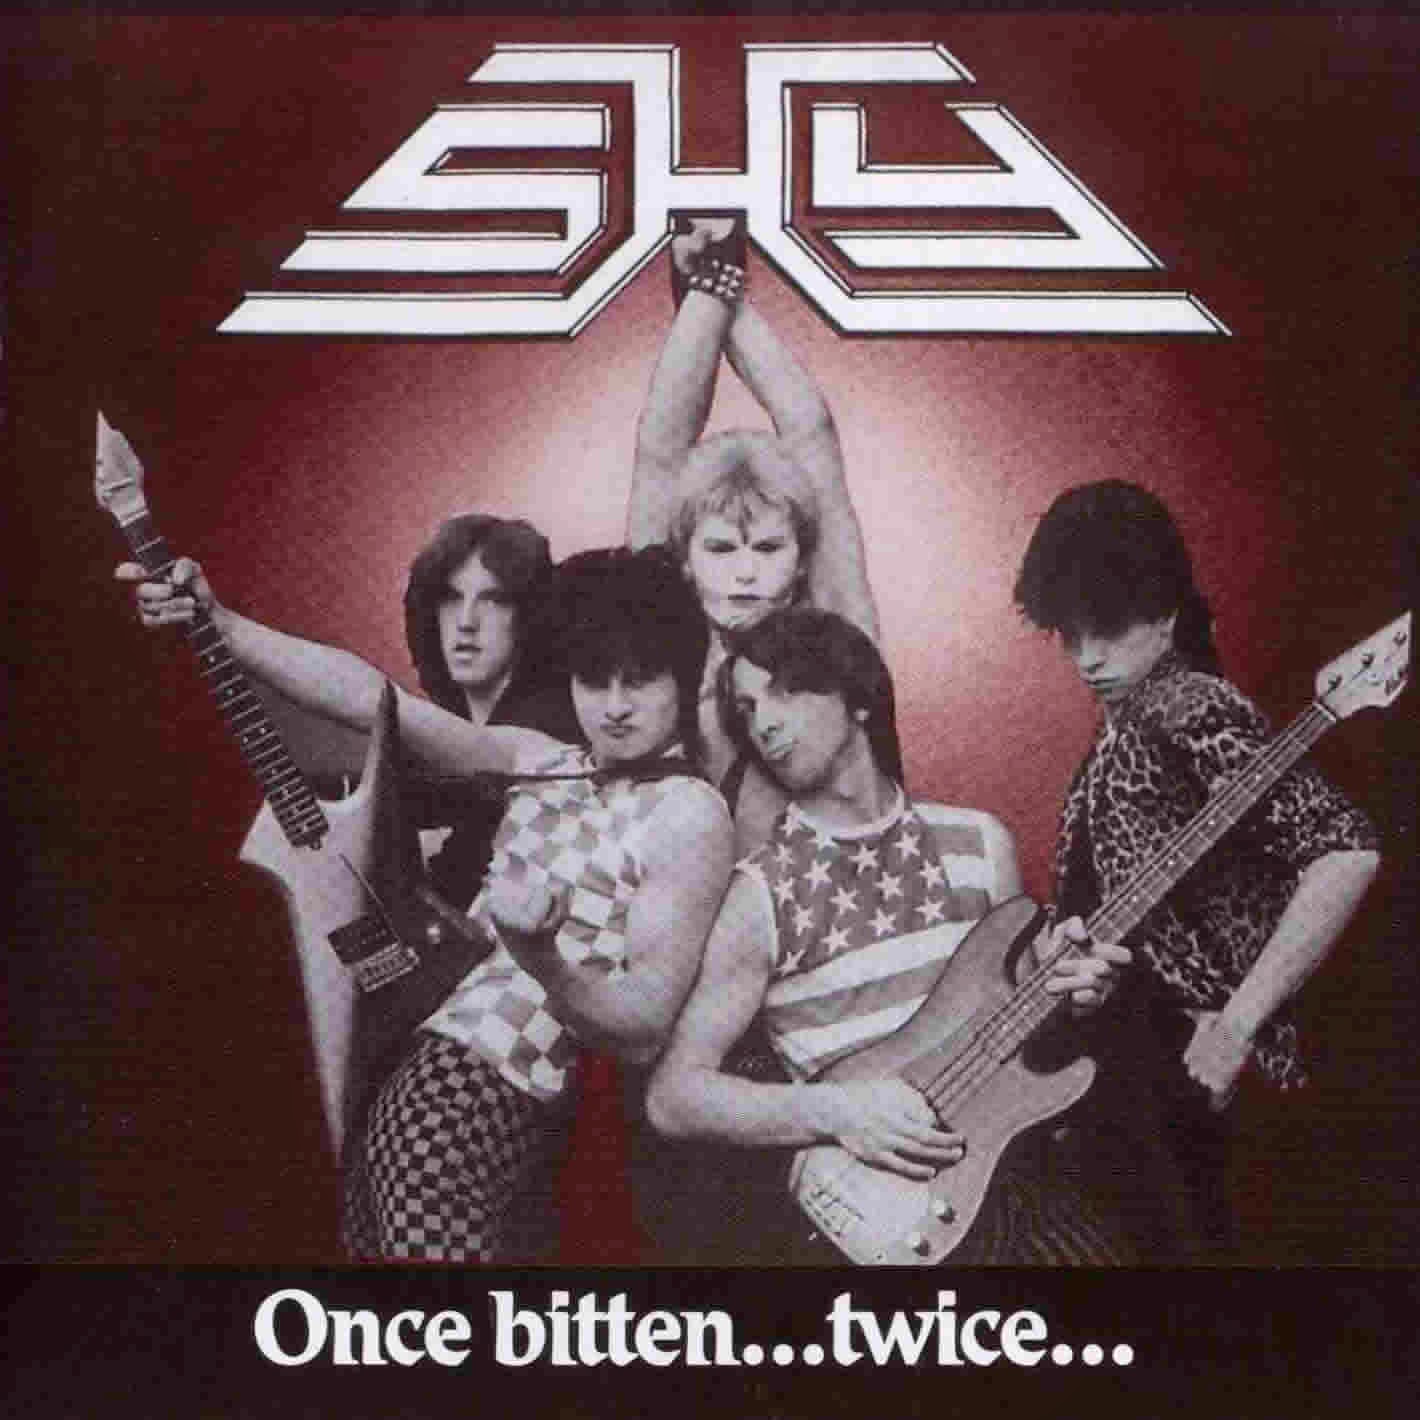 Shy Once bitten twice shy 1983 aor melodic rock music blogspot albums bands